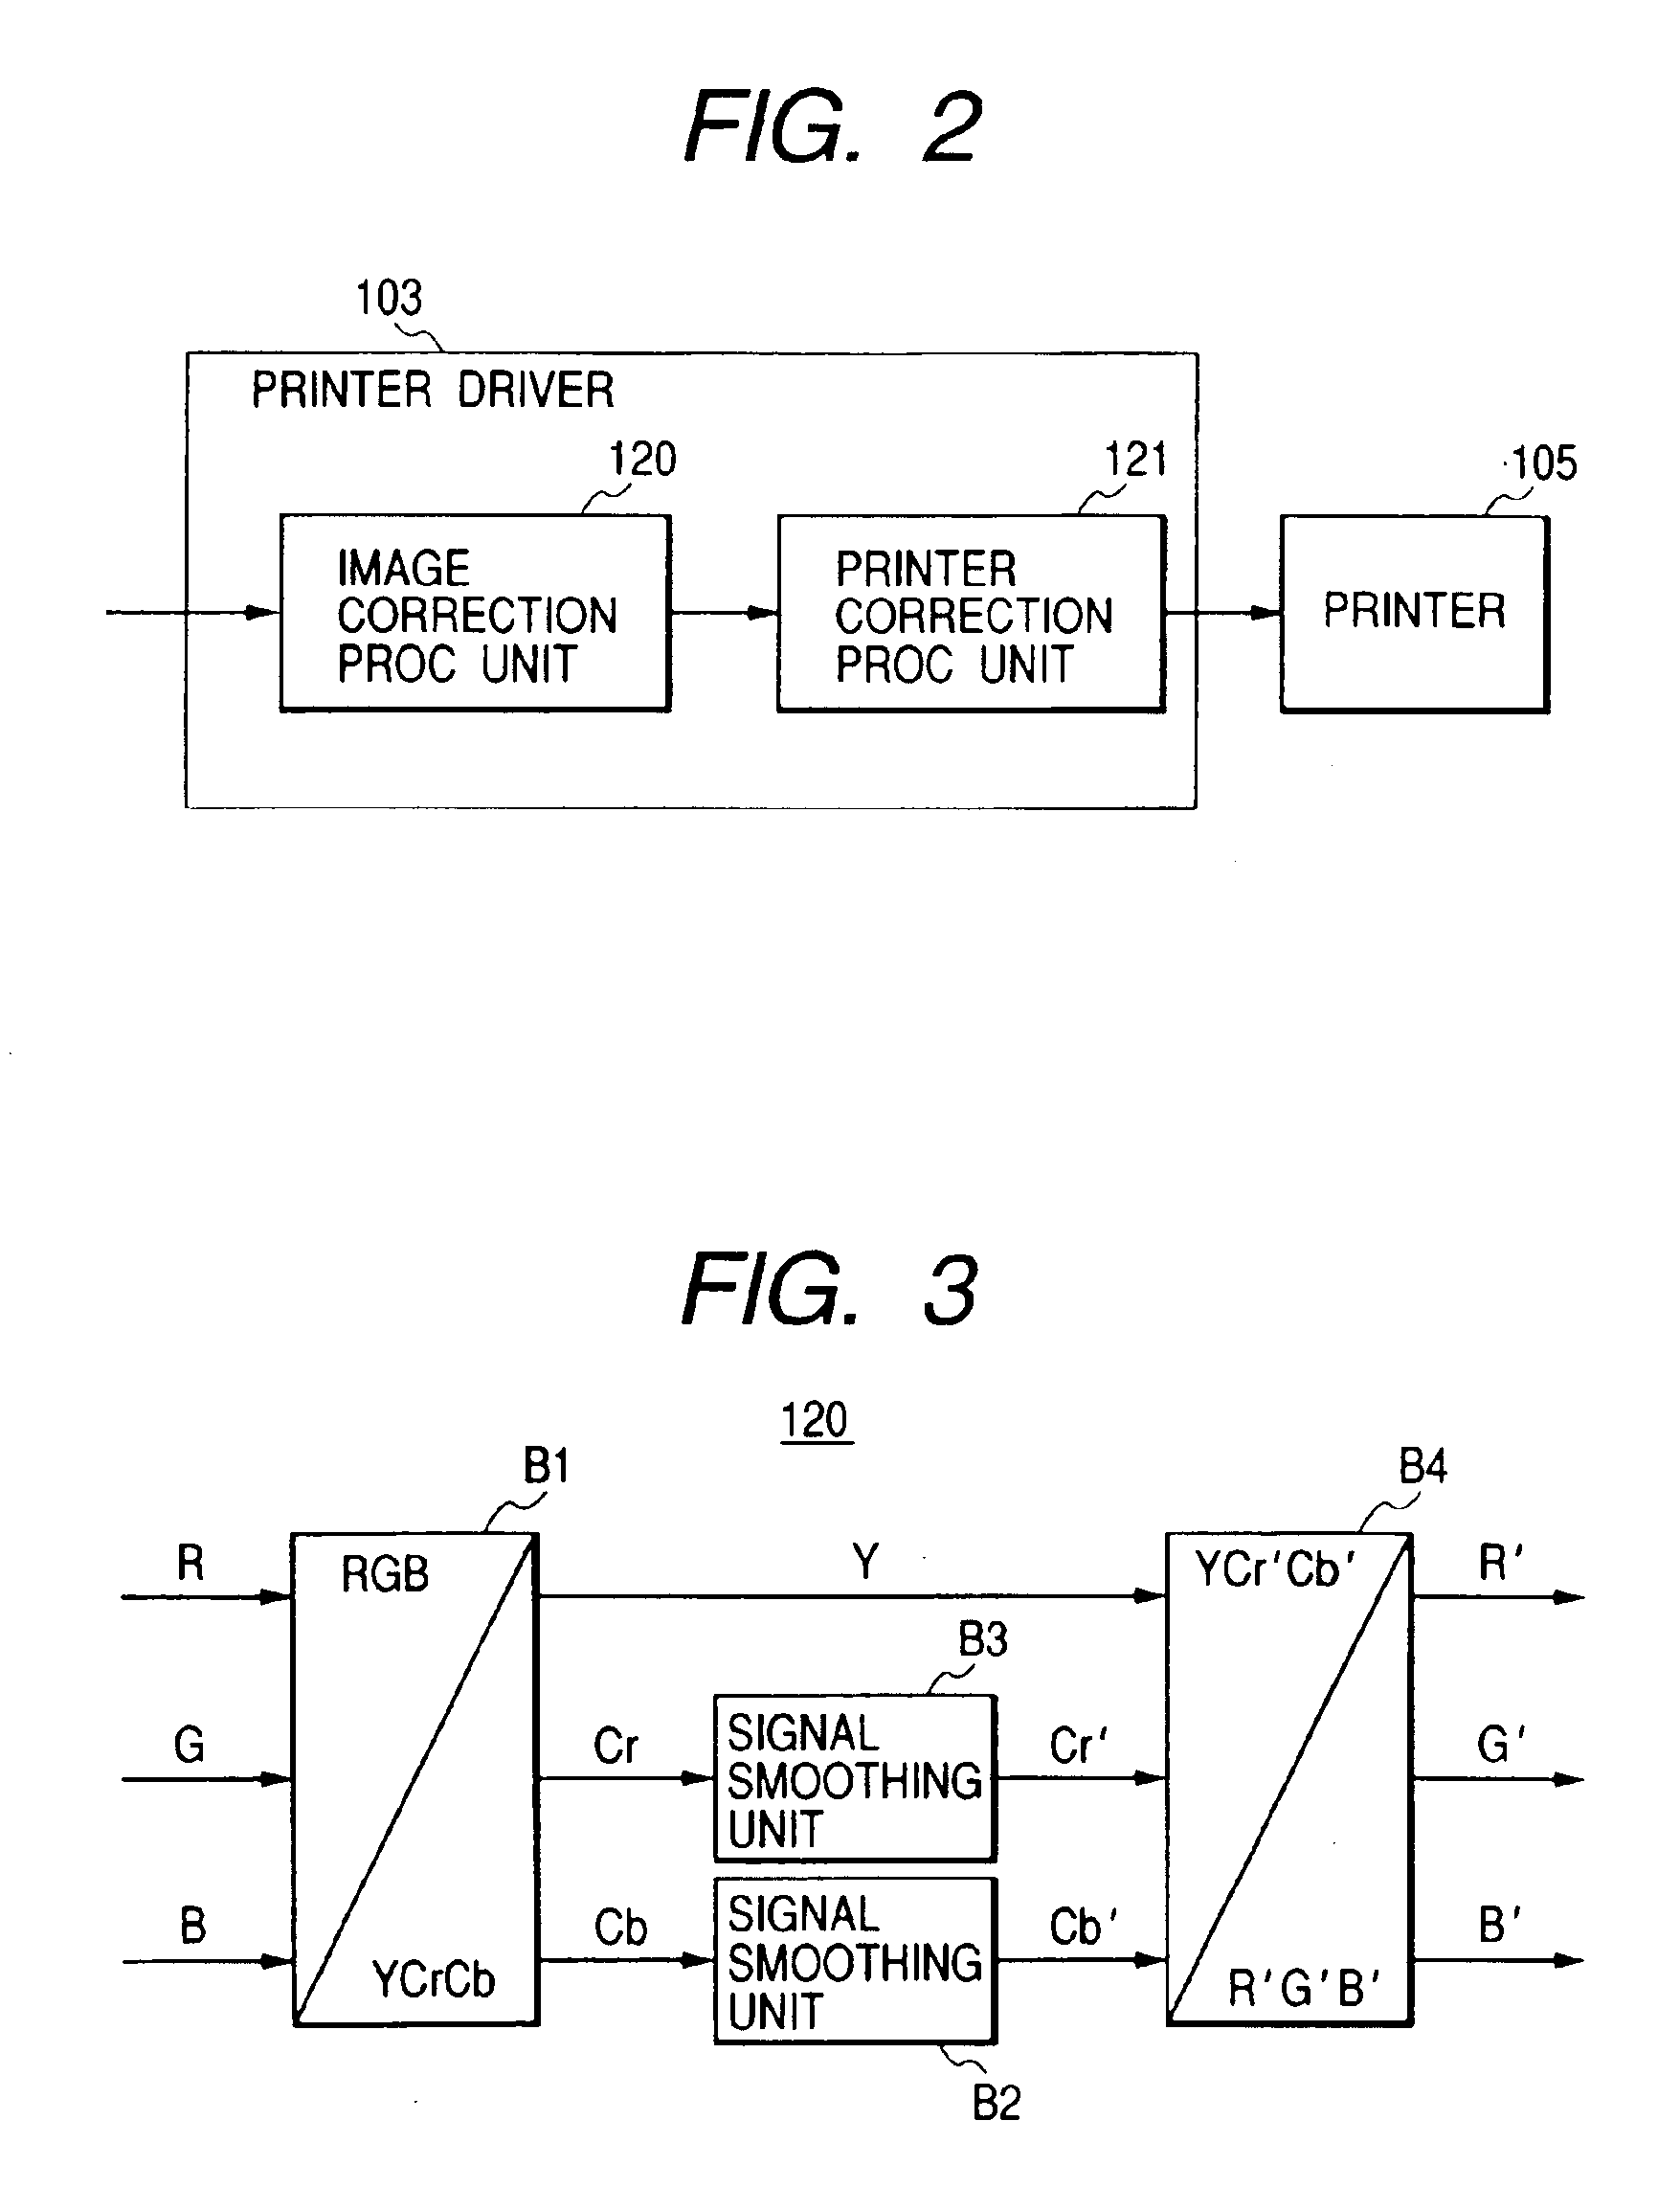 Image processing method and apparatus for color correction of an image